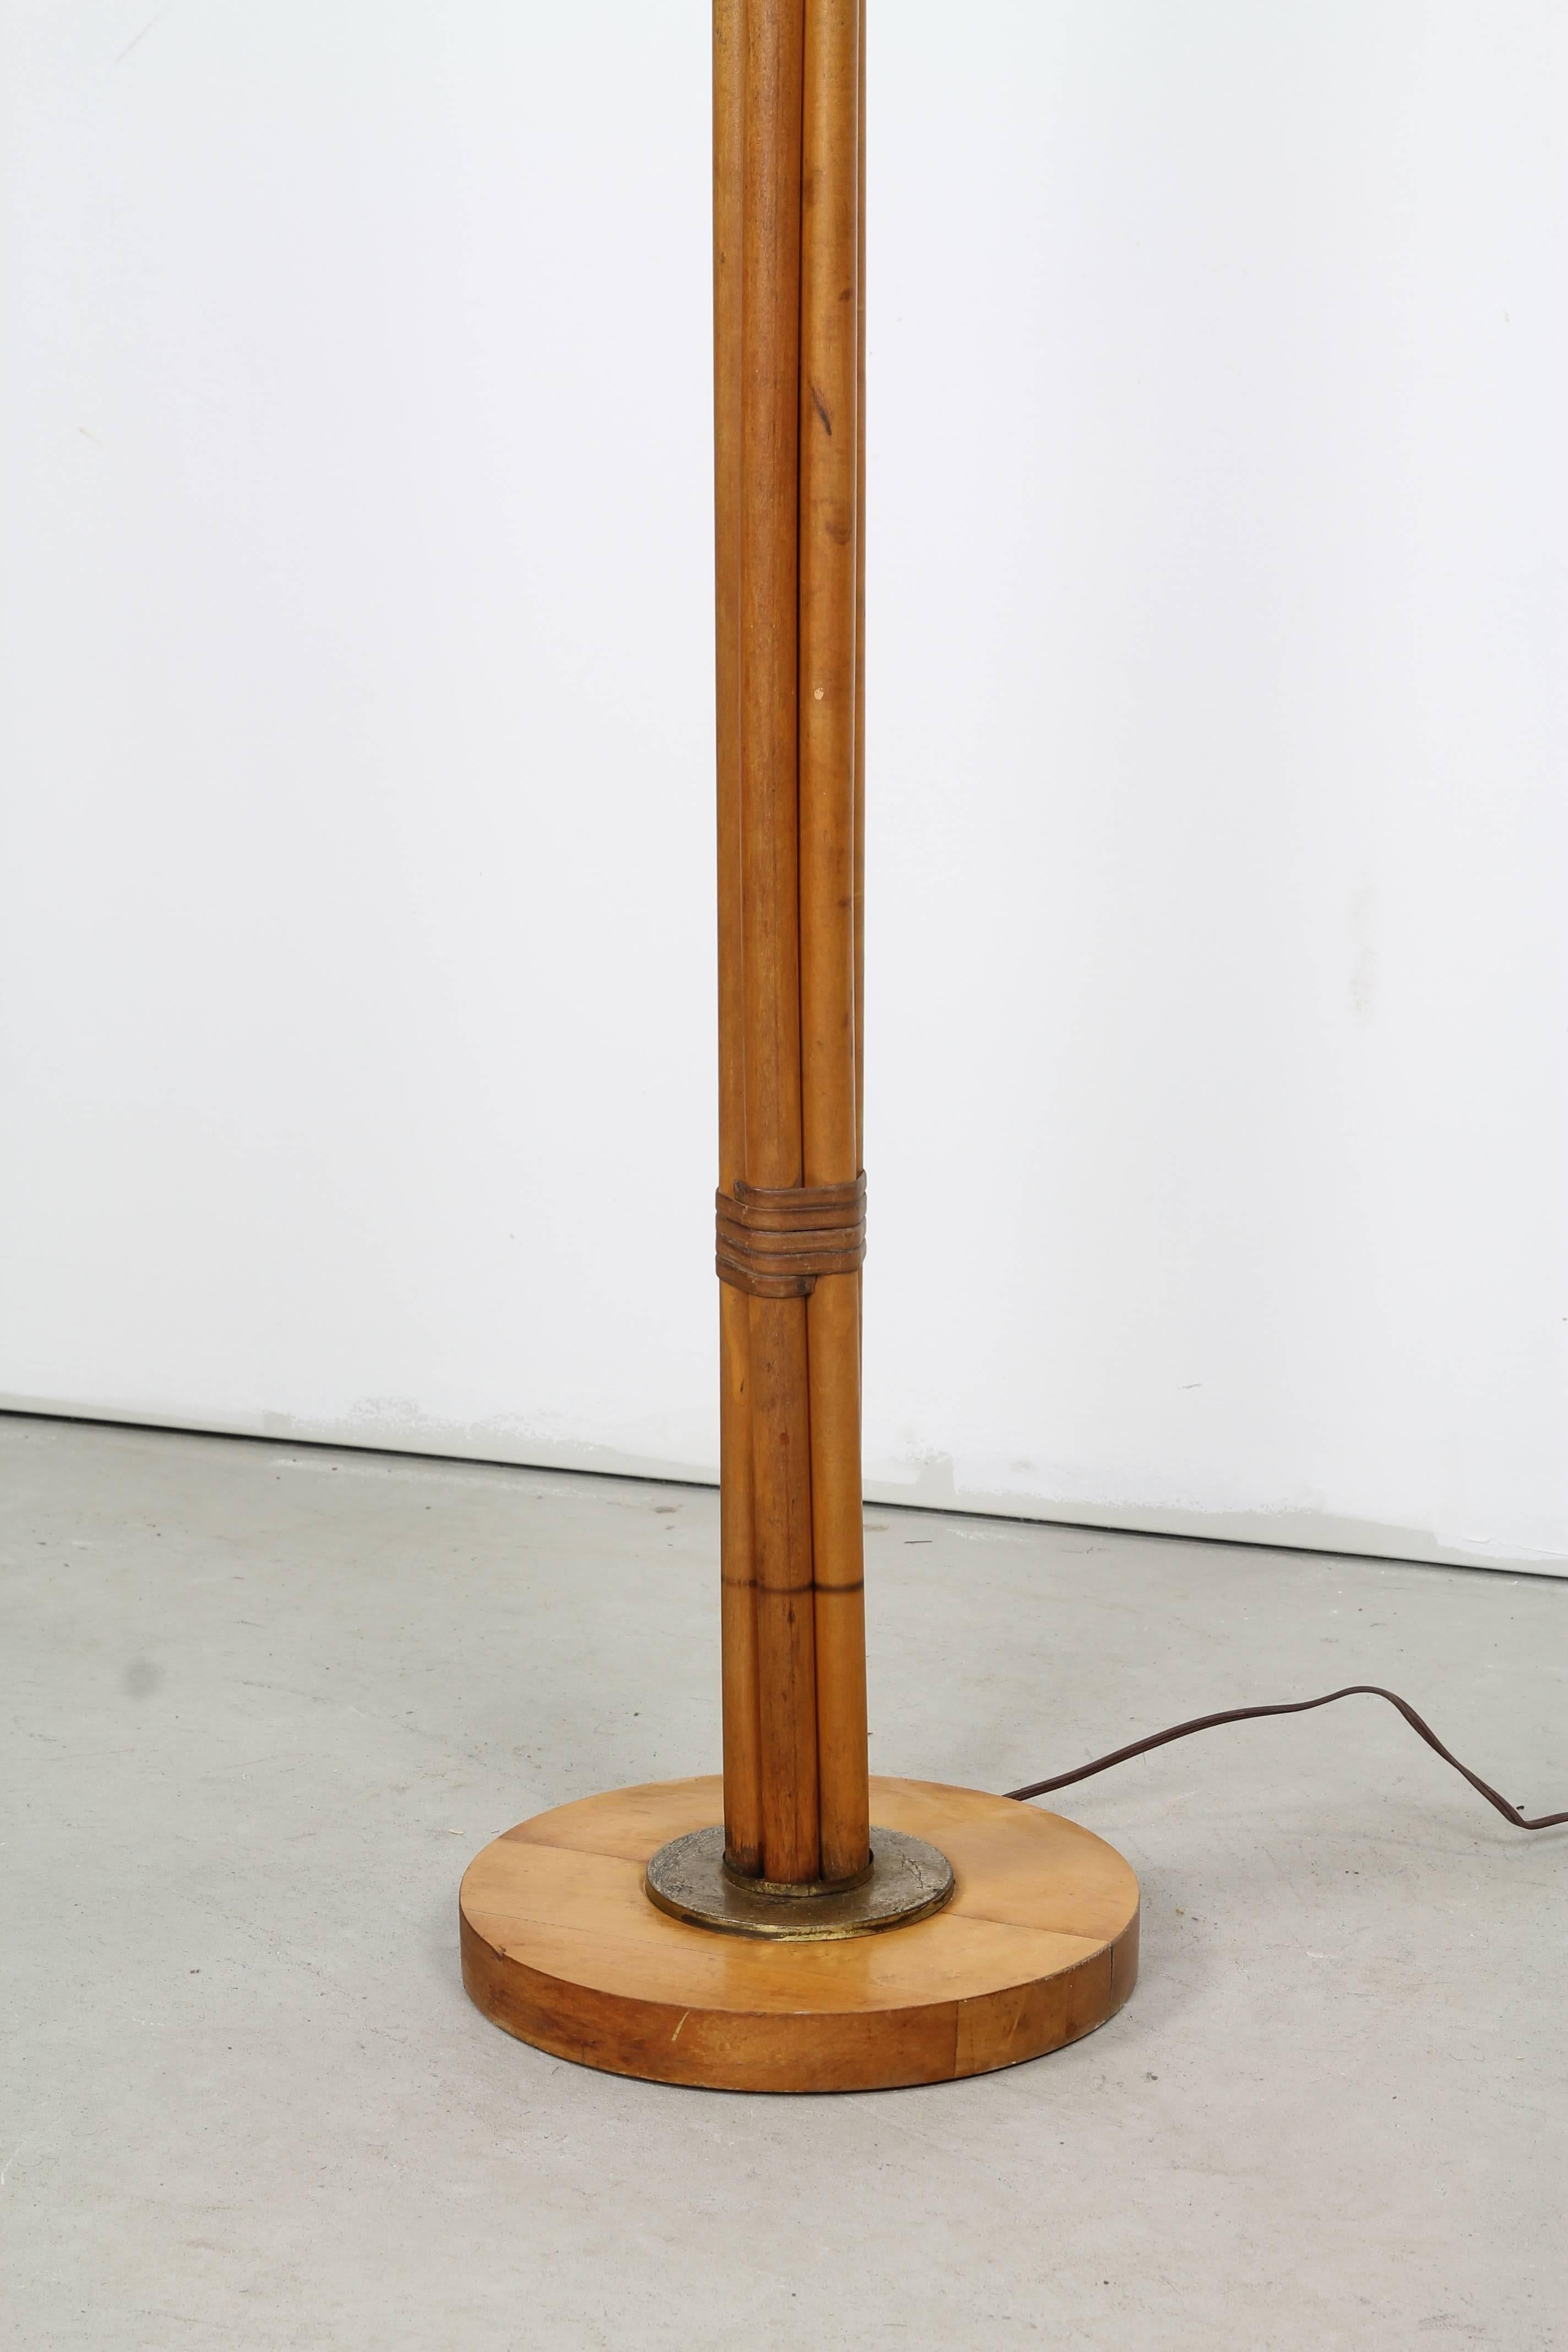 Elegant floor lamp in the manner of Paul Frankl, comprised of bundled bamboo shoots, stemming from a base of wood and brass with pristine original bamboo applique shade. 

Shade diameter: 18.5